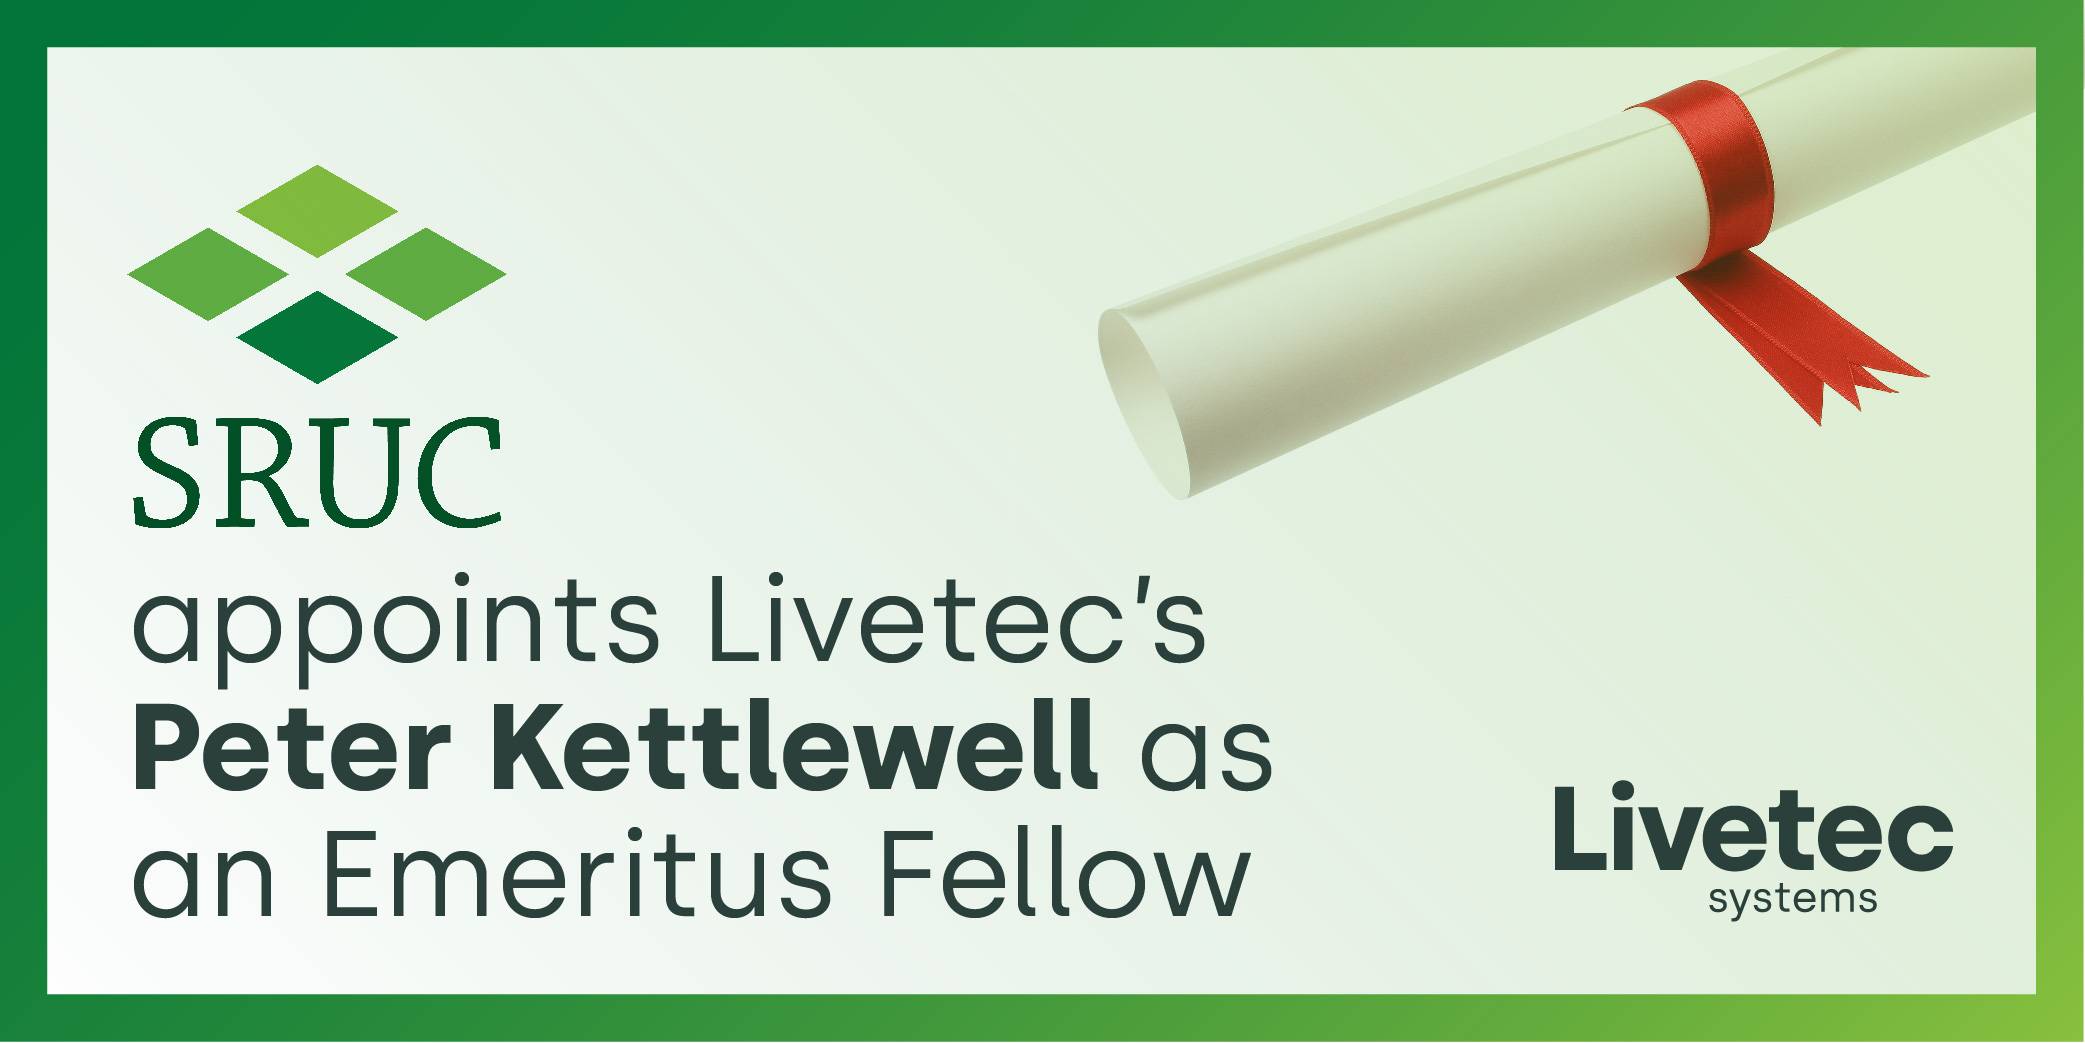 SRUC appoints Livetec’s Peter Kettlewell as an Emeritus Fellow